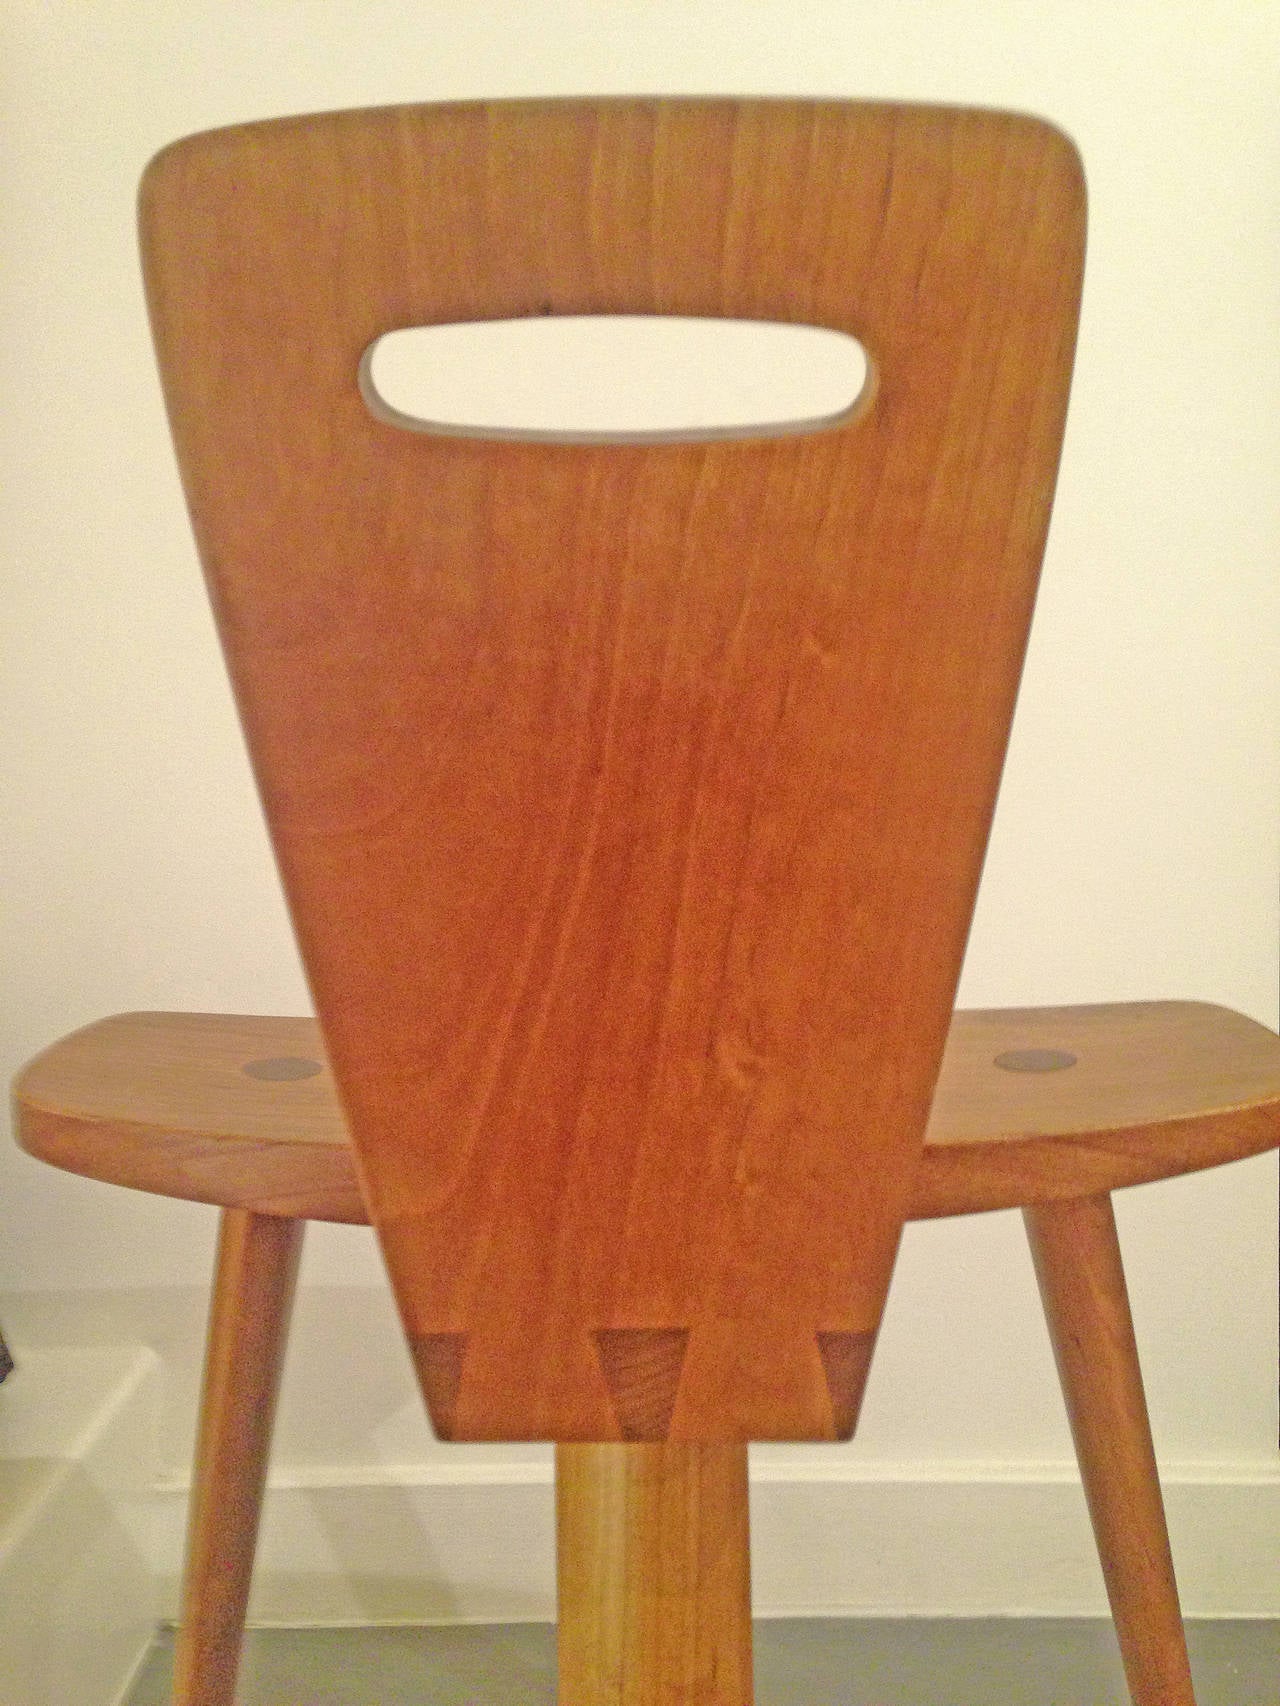 American Extremely Rare Three-Legged Stool by Tage Frid For Sale